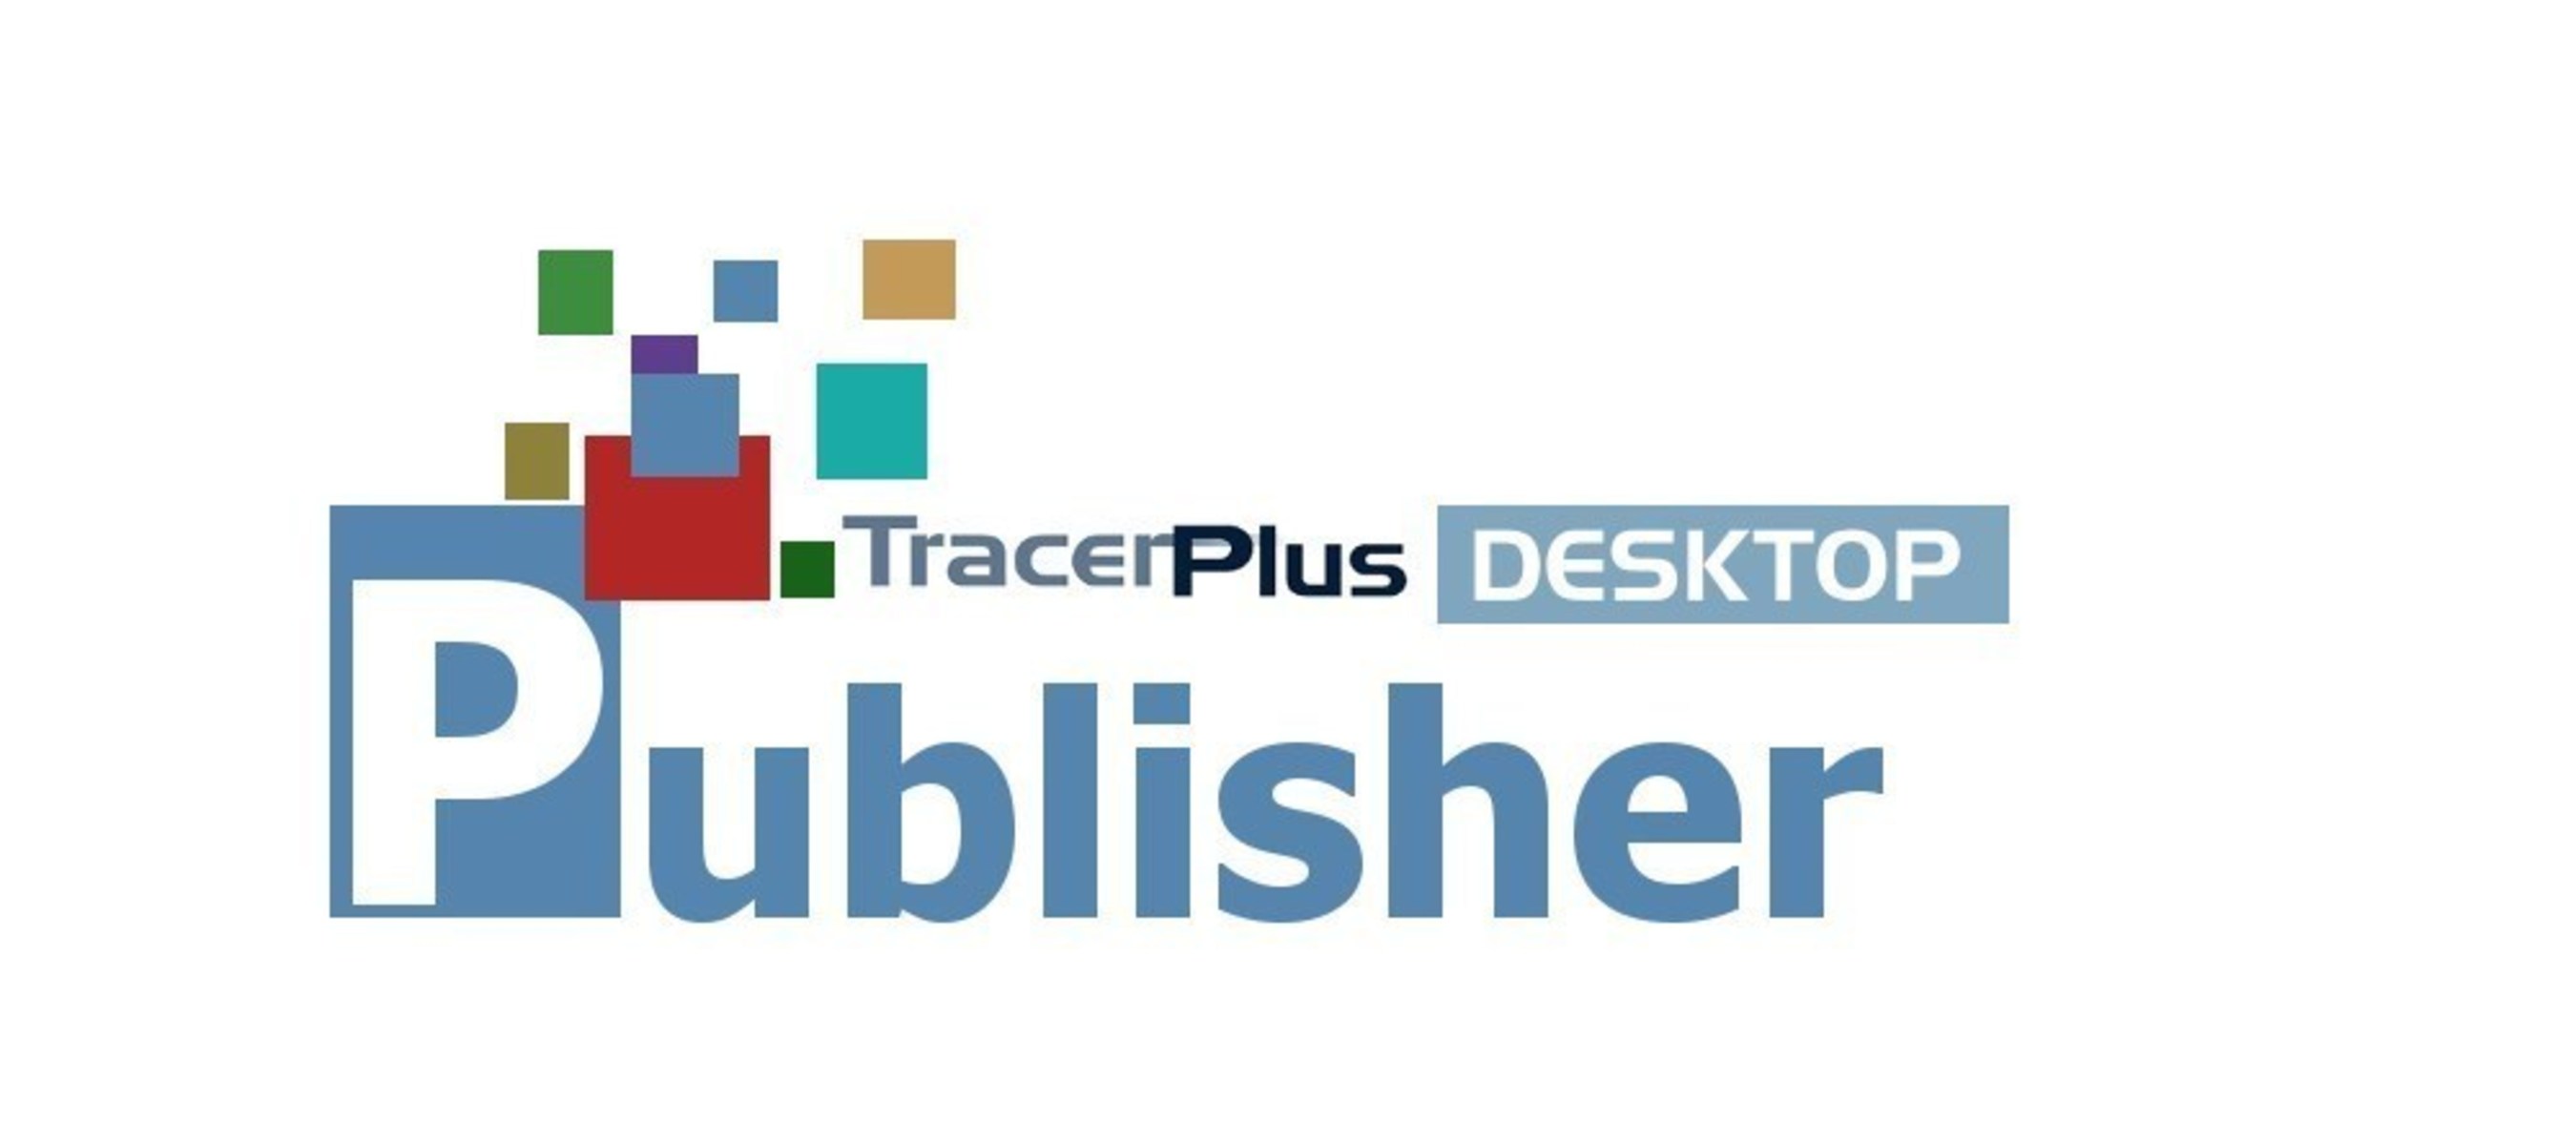 Re-brand, Build, and license your own Android and Windows Mobile/CE Apps, 100% controlled by you, TracerPlus Desktop - Publisher Edition. Call us today and we'll help you get started.